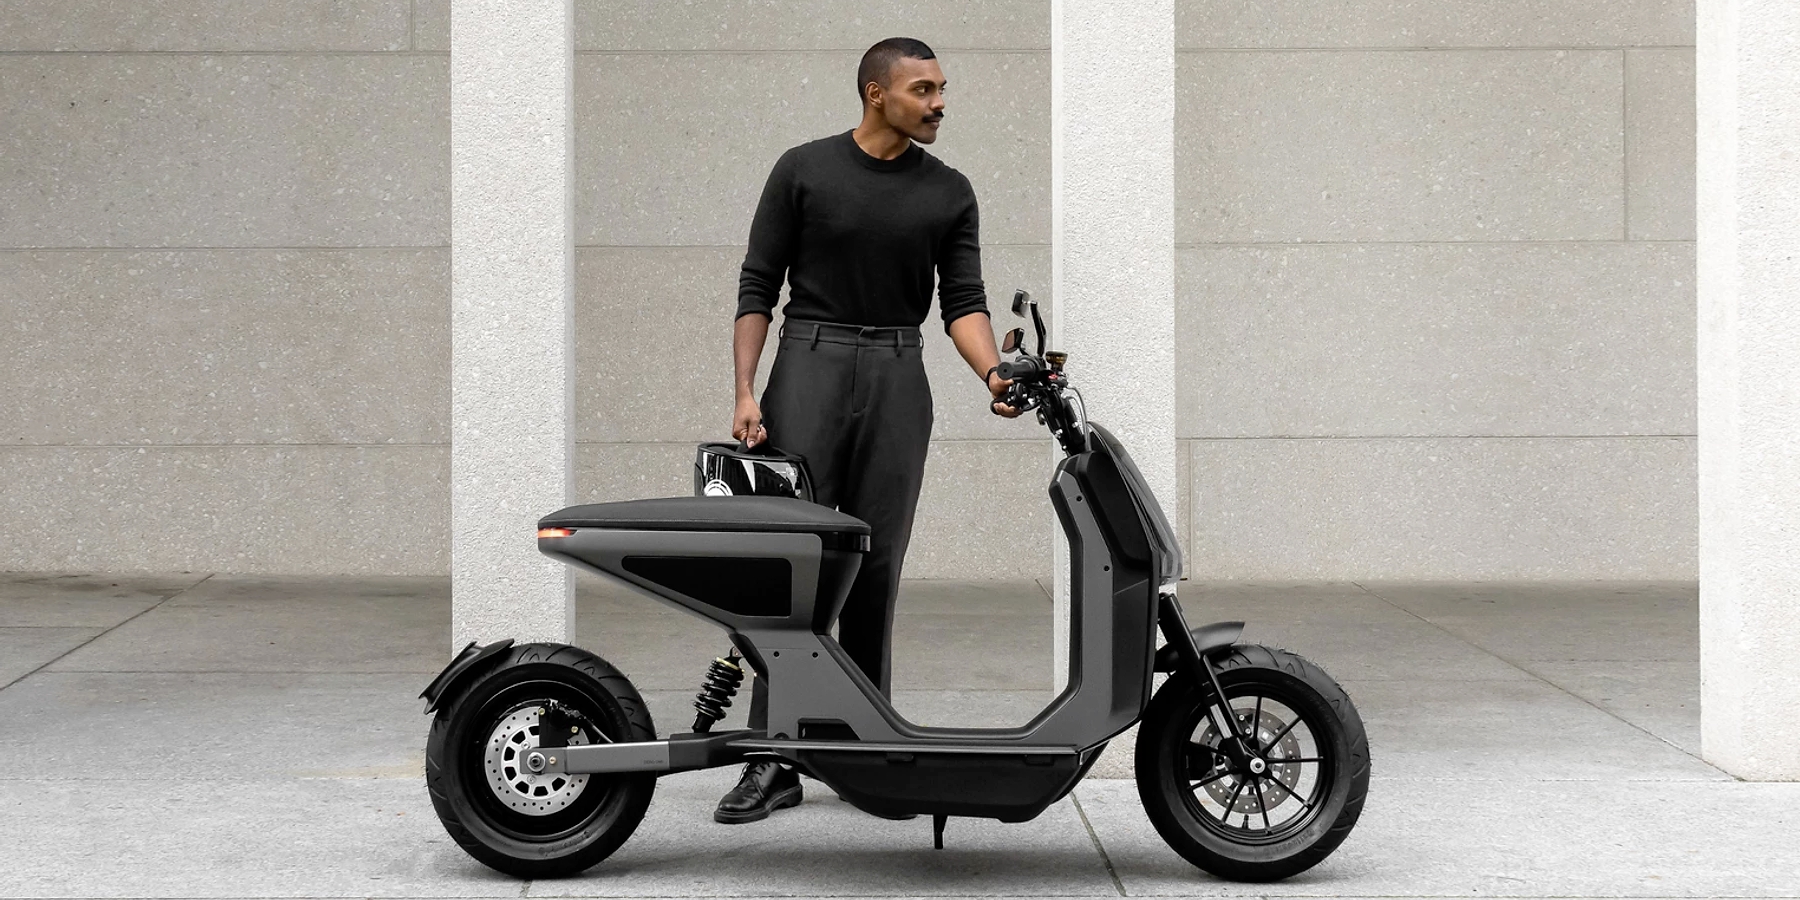 62 electric scooter with distinctive new design